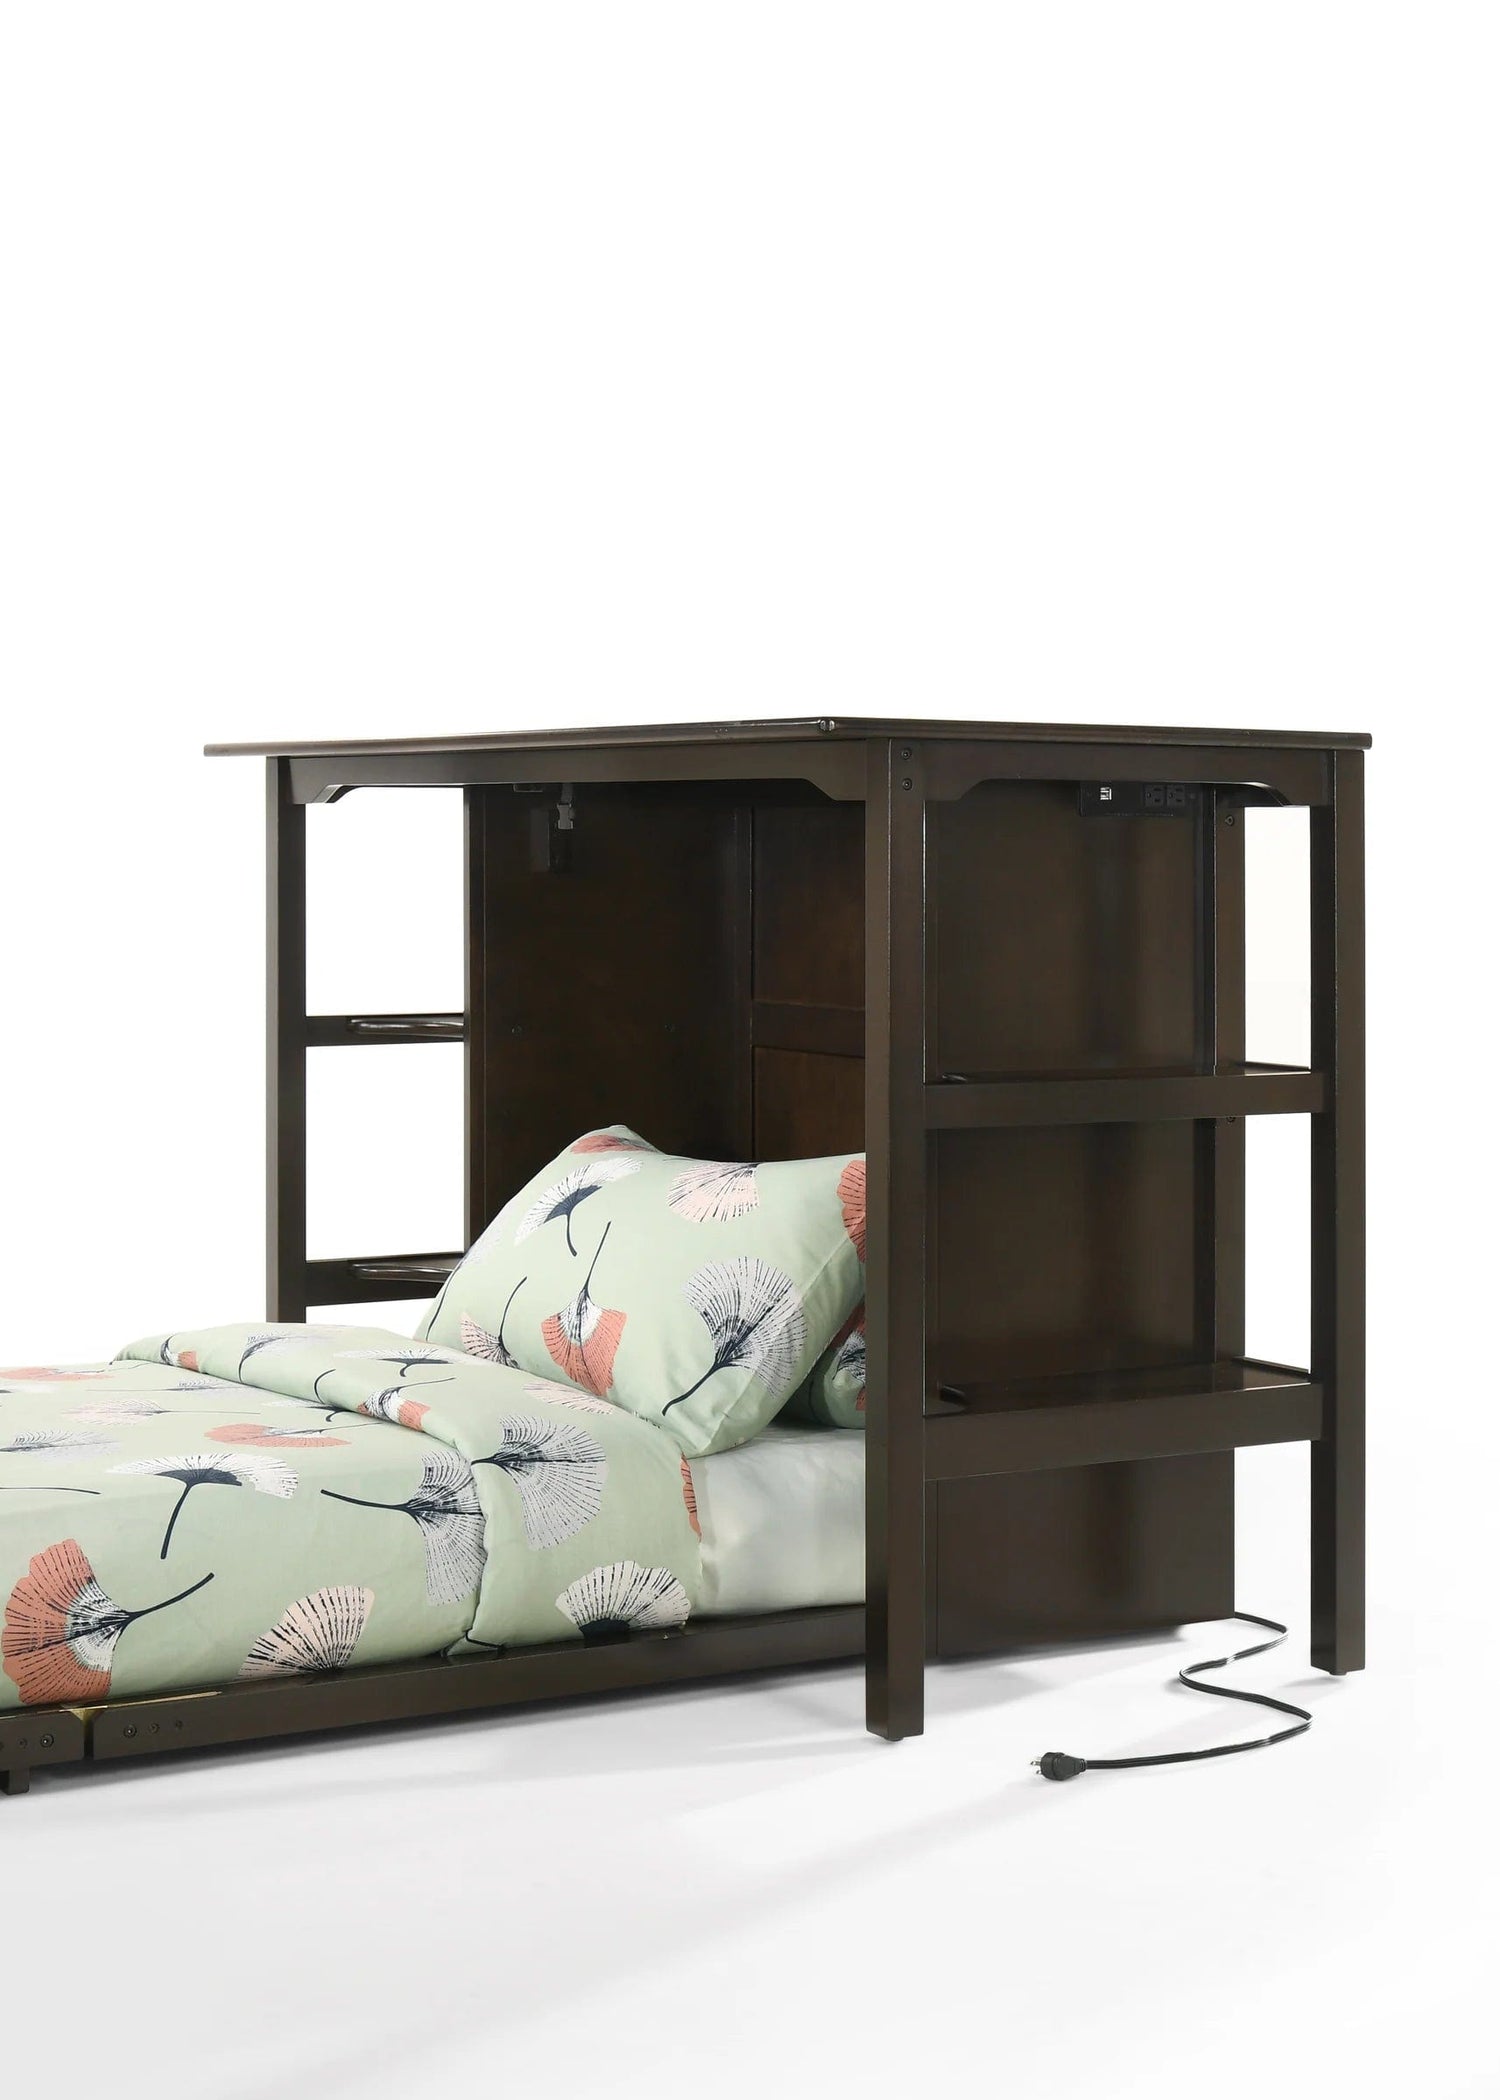 Night and Day Furniture Siesta Twin Desk Bed in Chocolate with Mattress and Chair